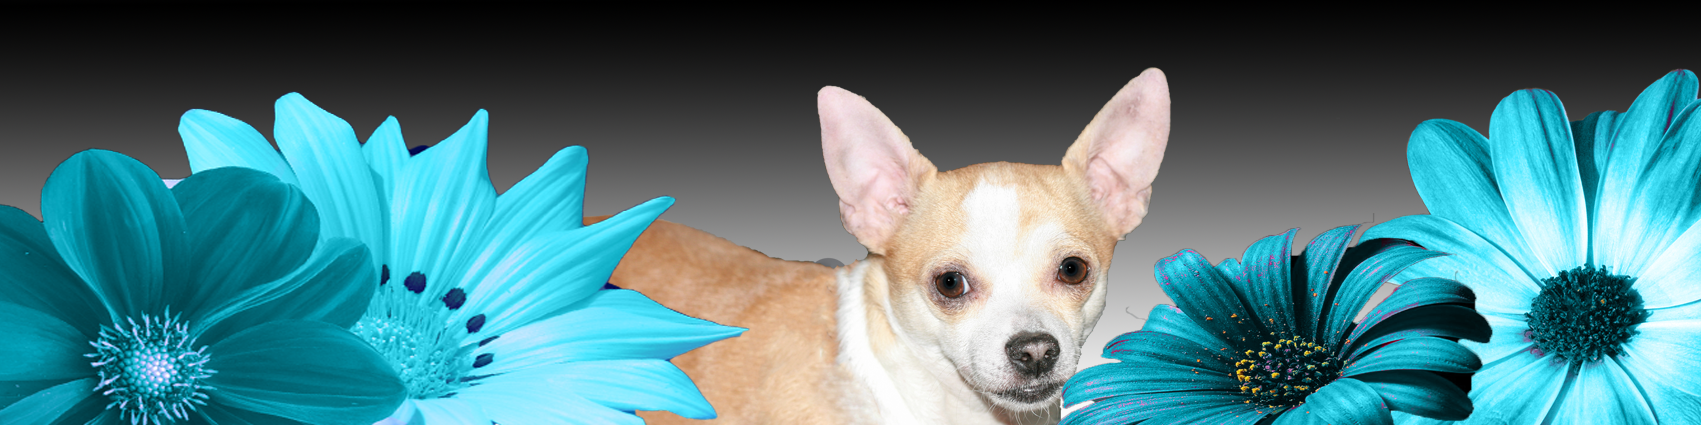 ollie-banner2.png